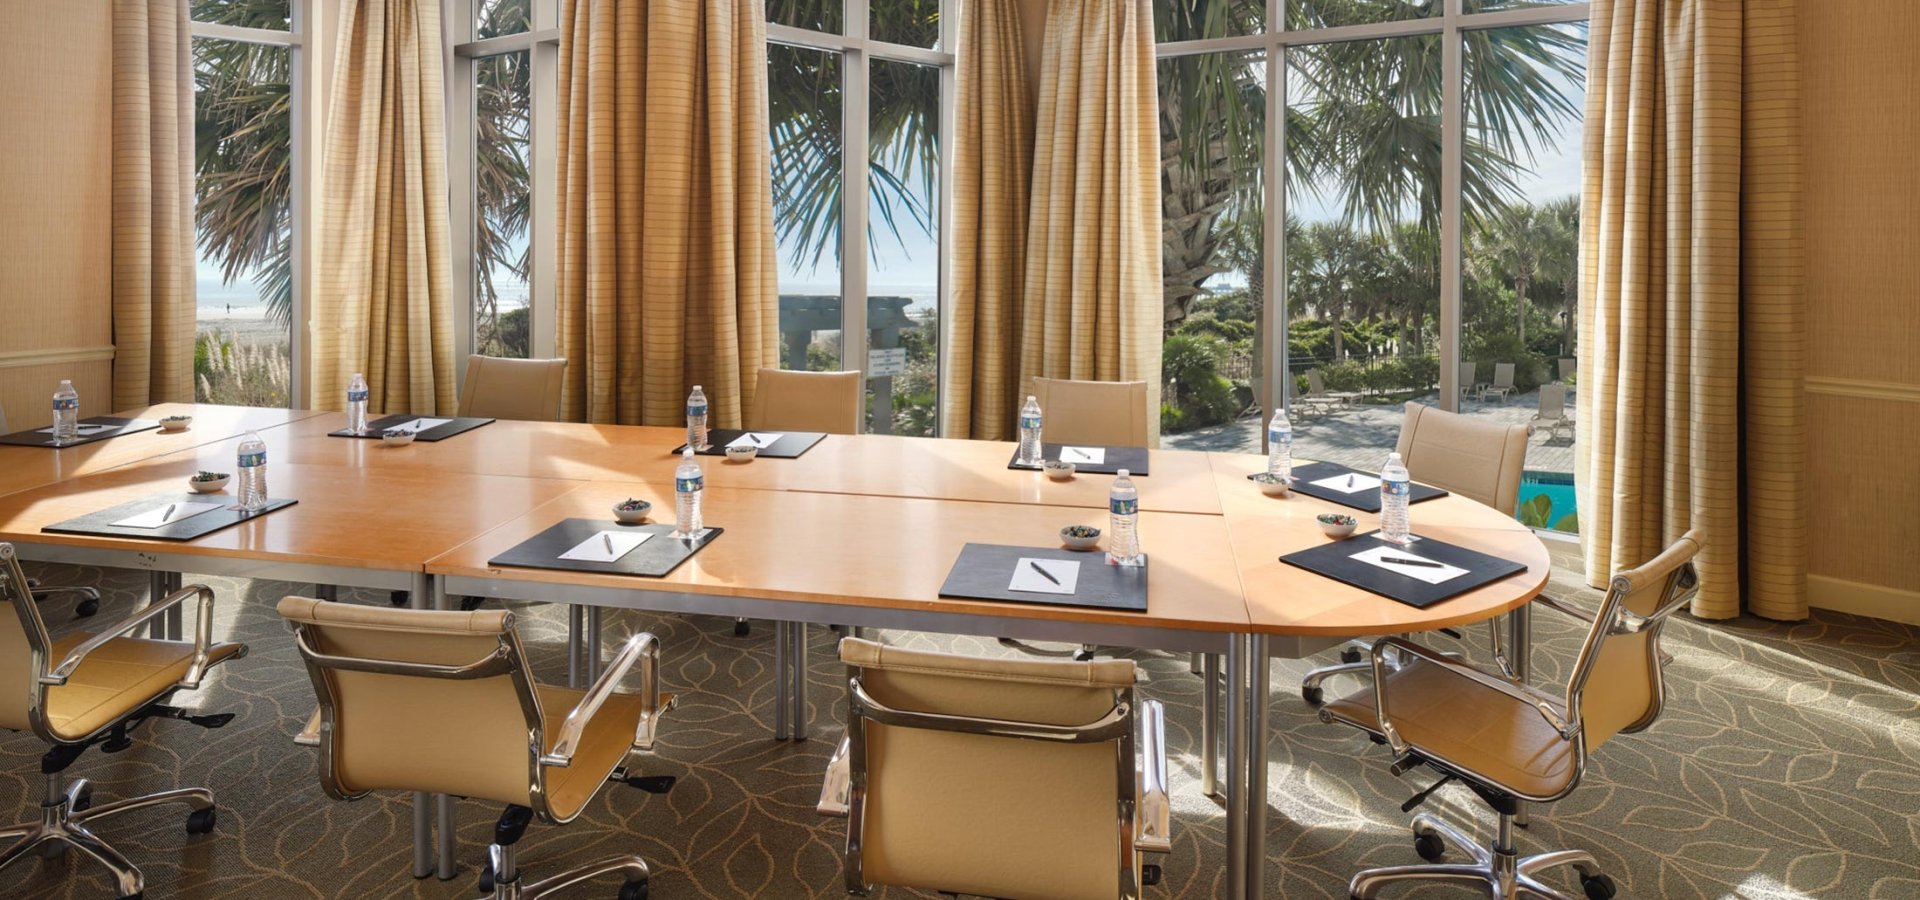 The Dover Conference Room in Myrtle Beach